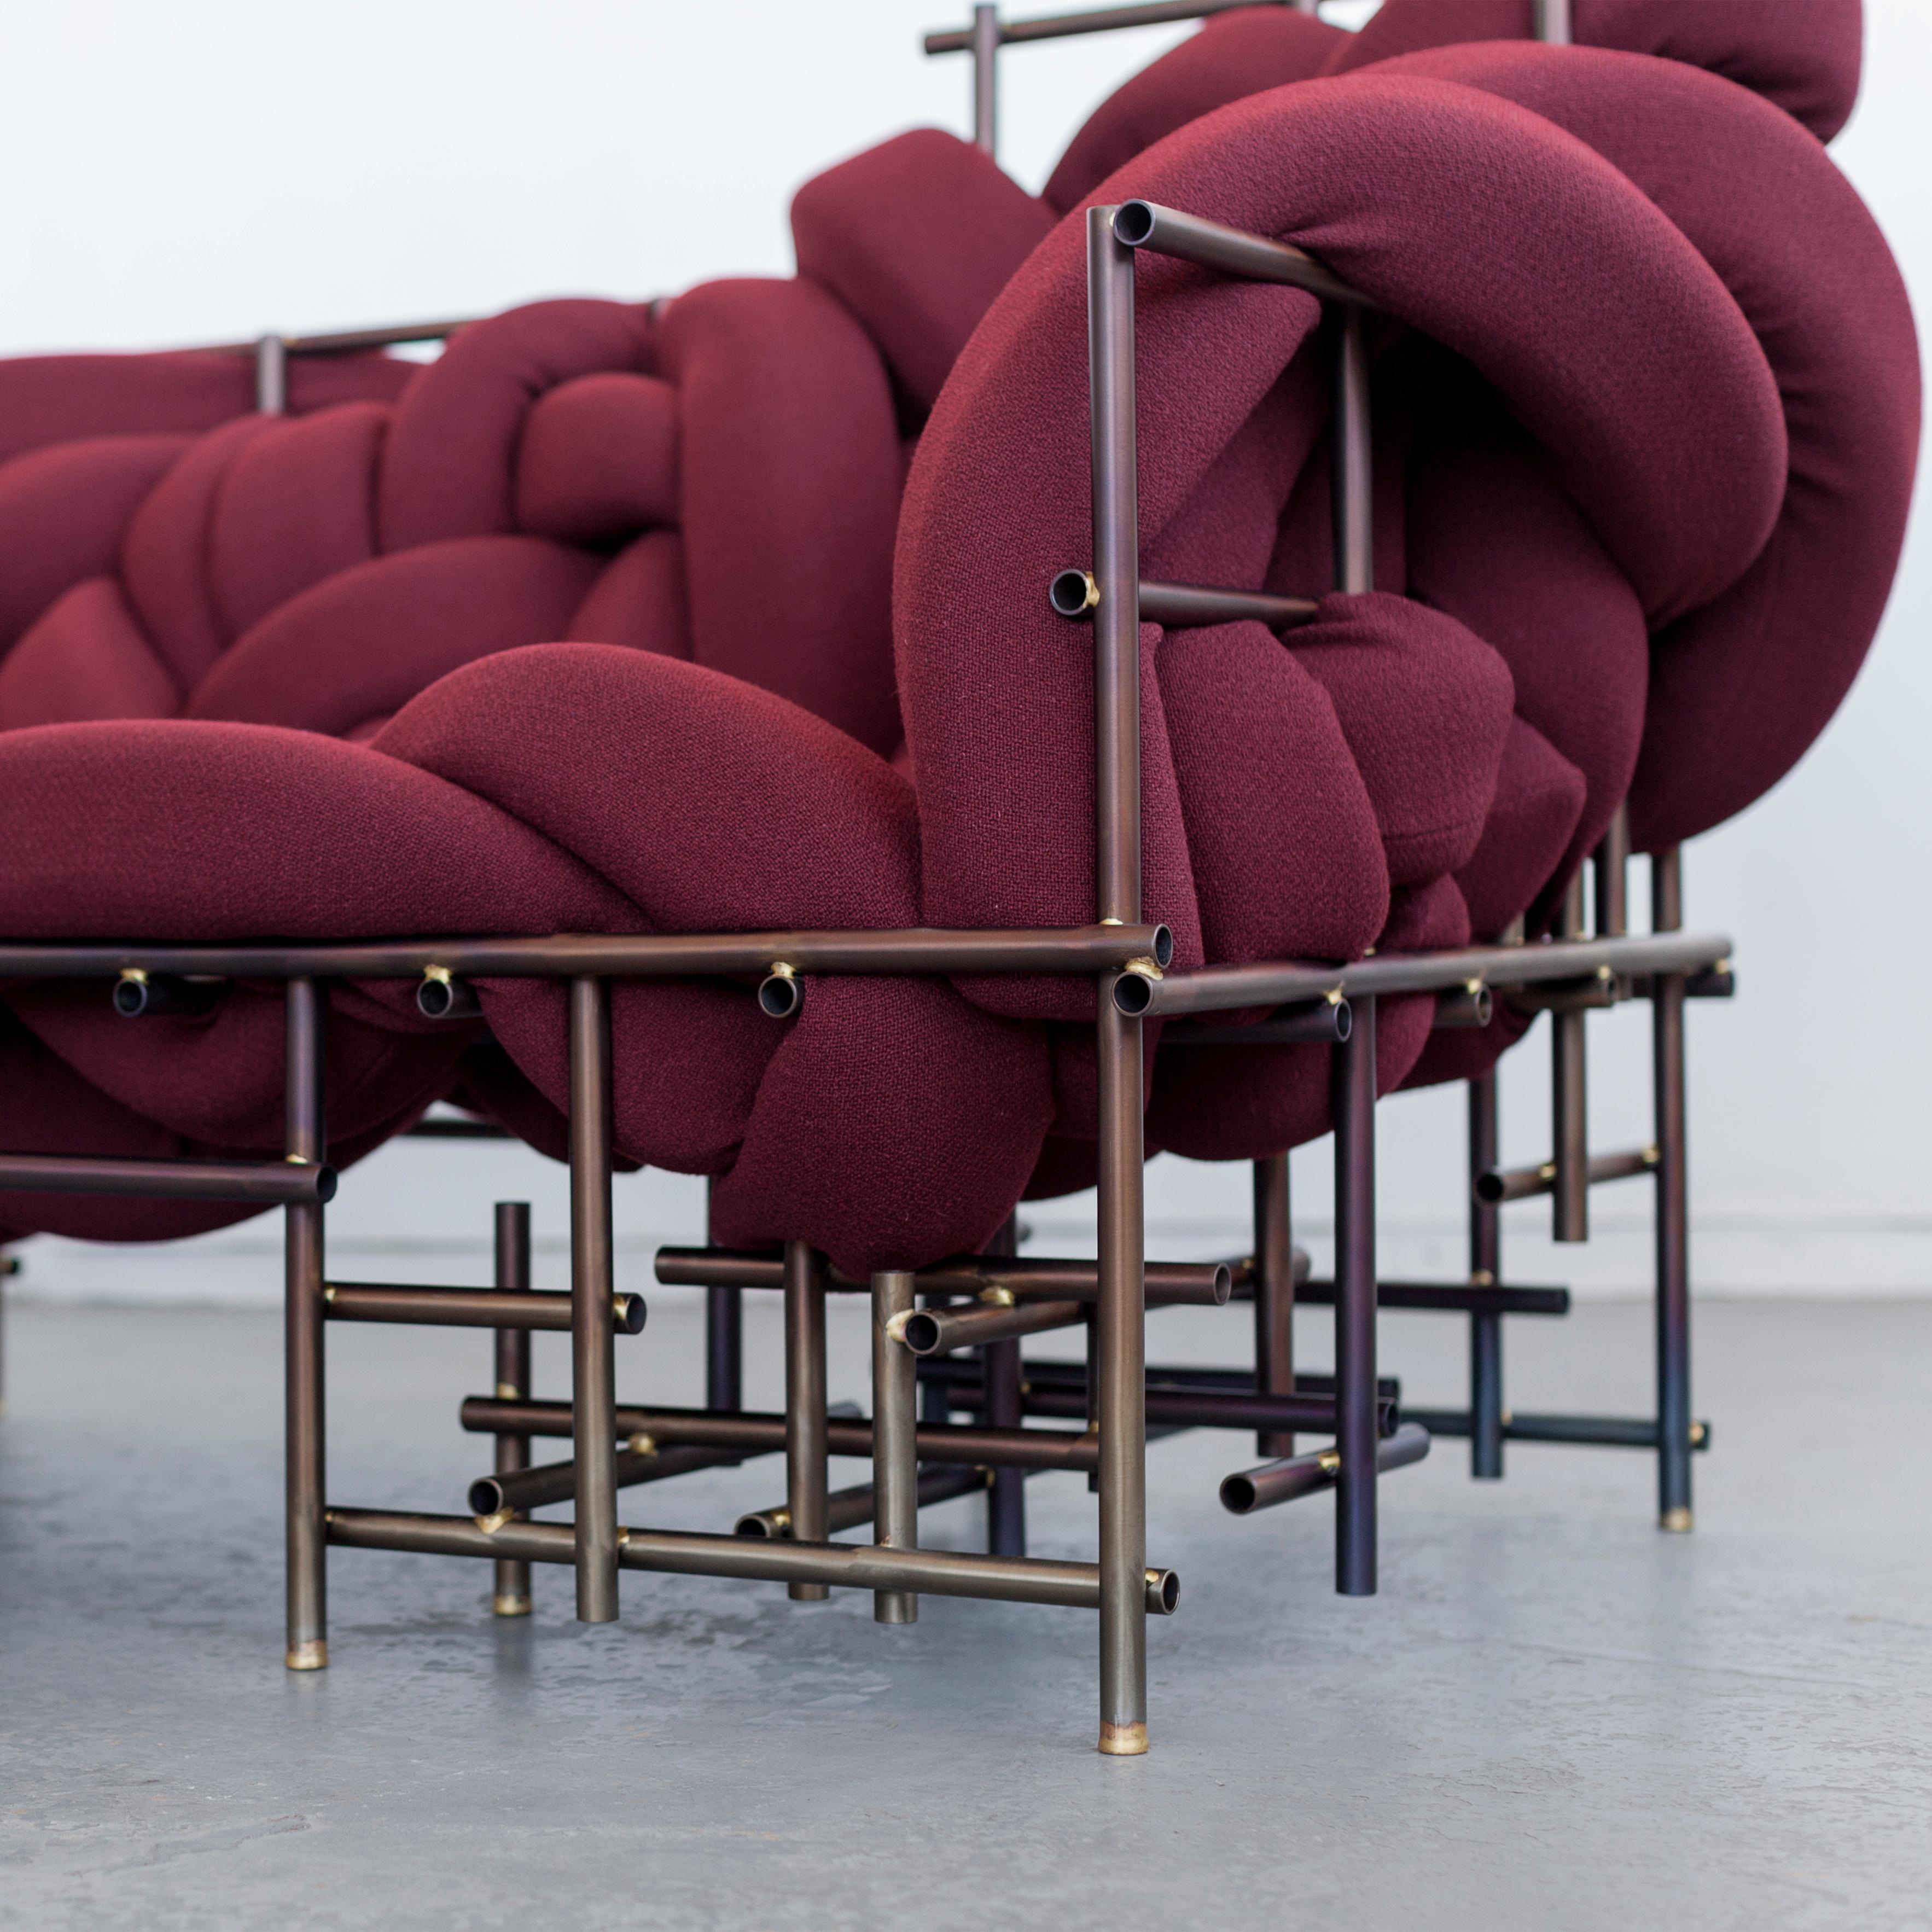 Lawless sofa
Each is a unique hand-sculpted creation by Evan Fay
Dimensions:
W 1676, D 863, H 1016 mm
W 66”, D 34”, H 40” inches (can be made to order in other dimensions)
Materials: Steel, brass, foam, Knoll stretch appeal upholstery